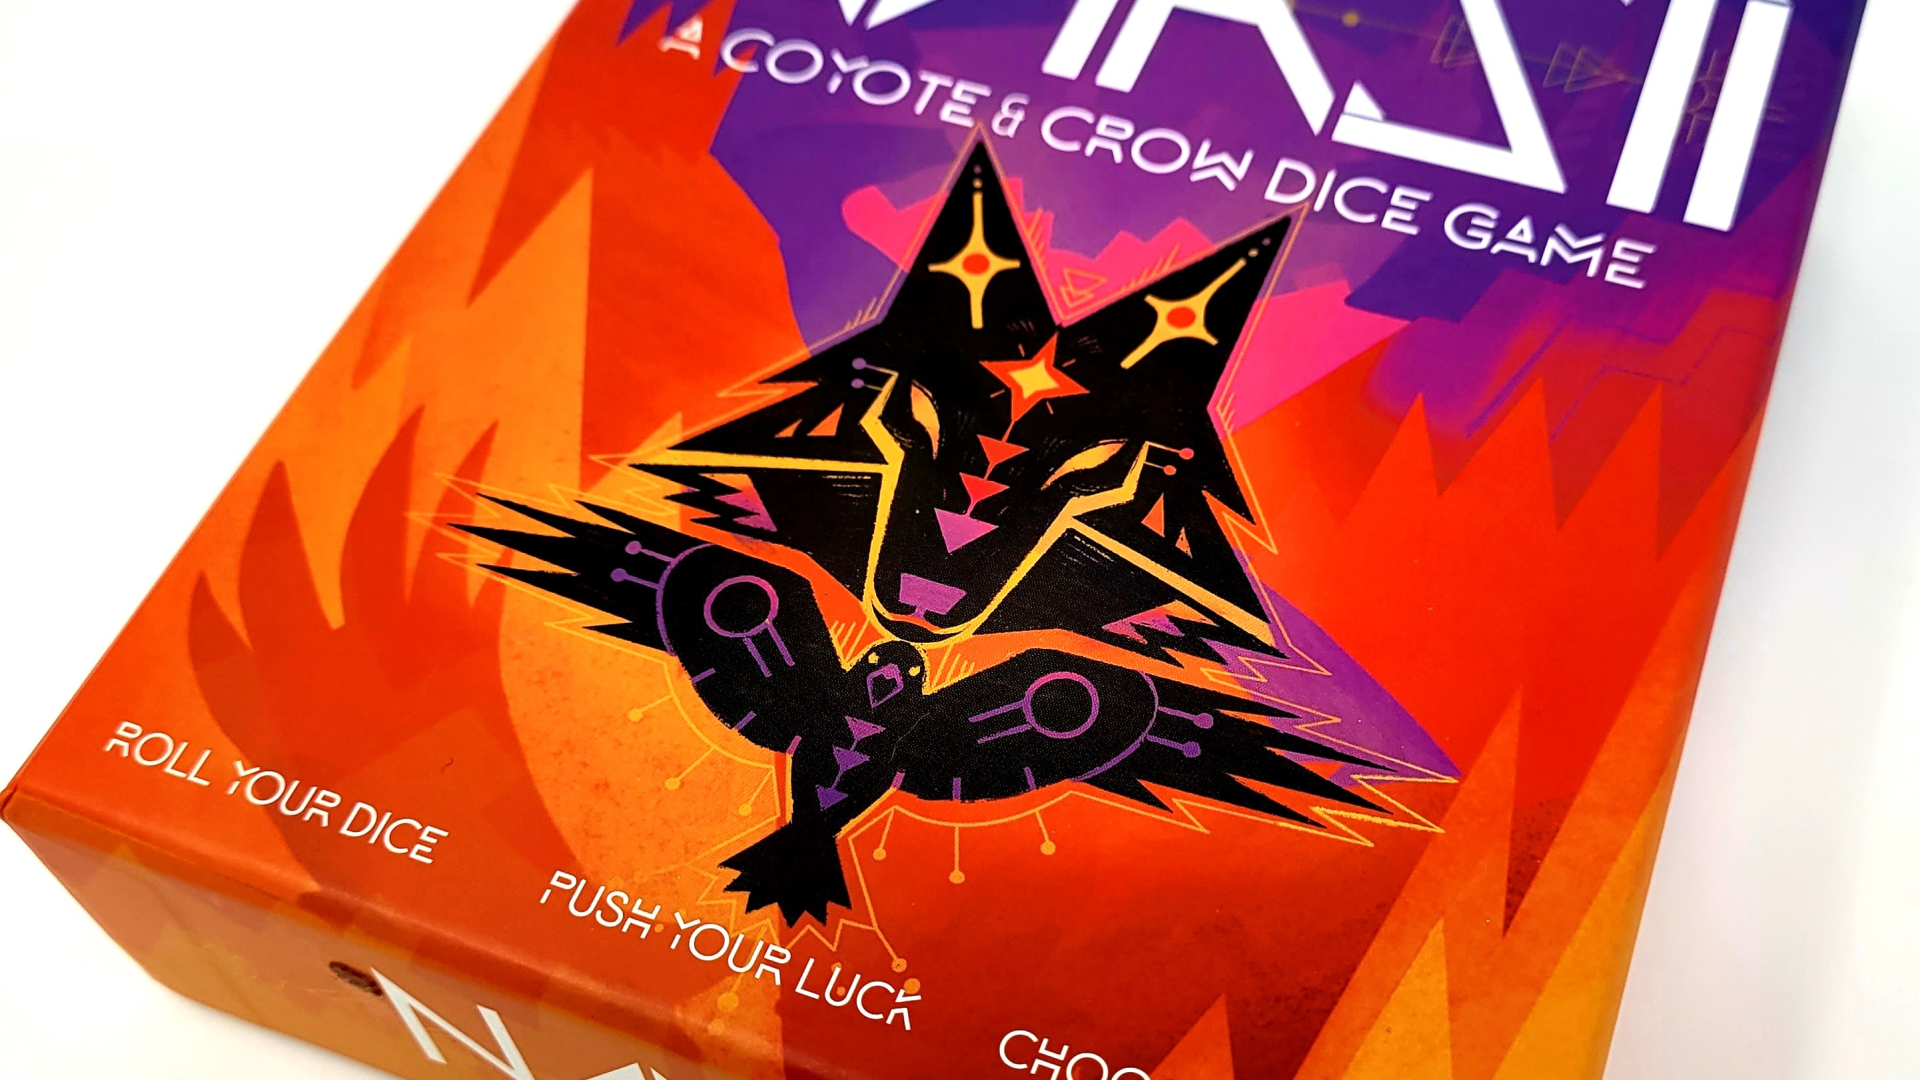 Box art of Naasii: A Coyote & Crow dice game.